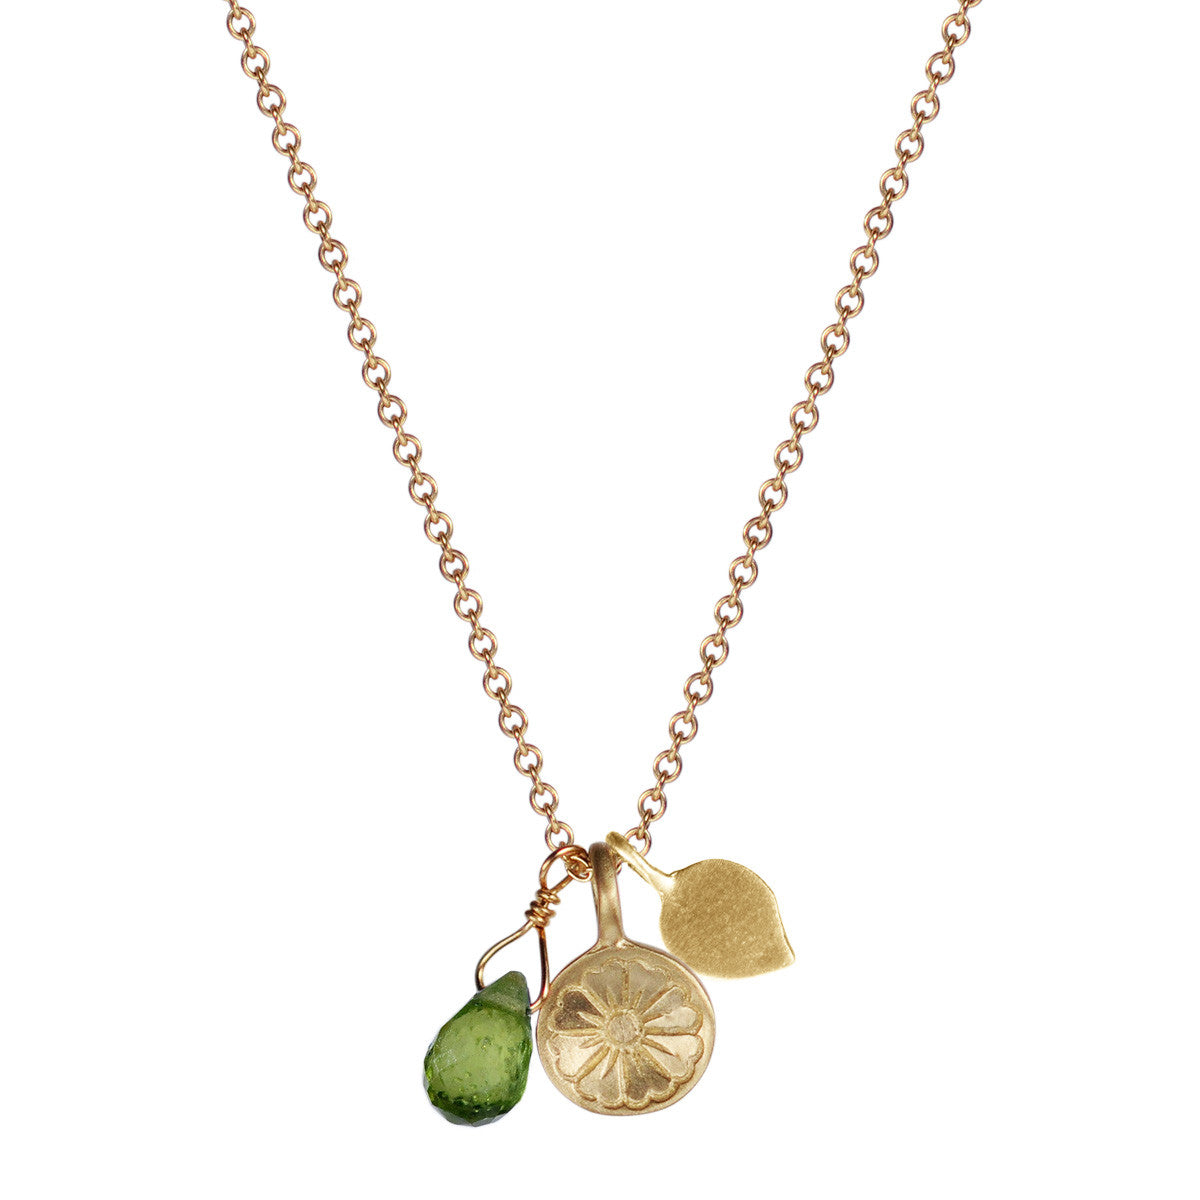 10K Gold Flower Trinket on Chain with Lotus Petal and Vesuvianite Bead